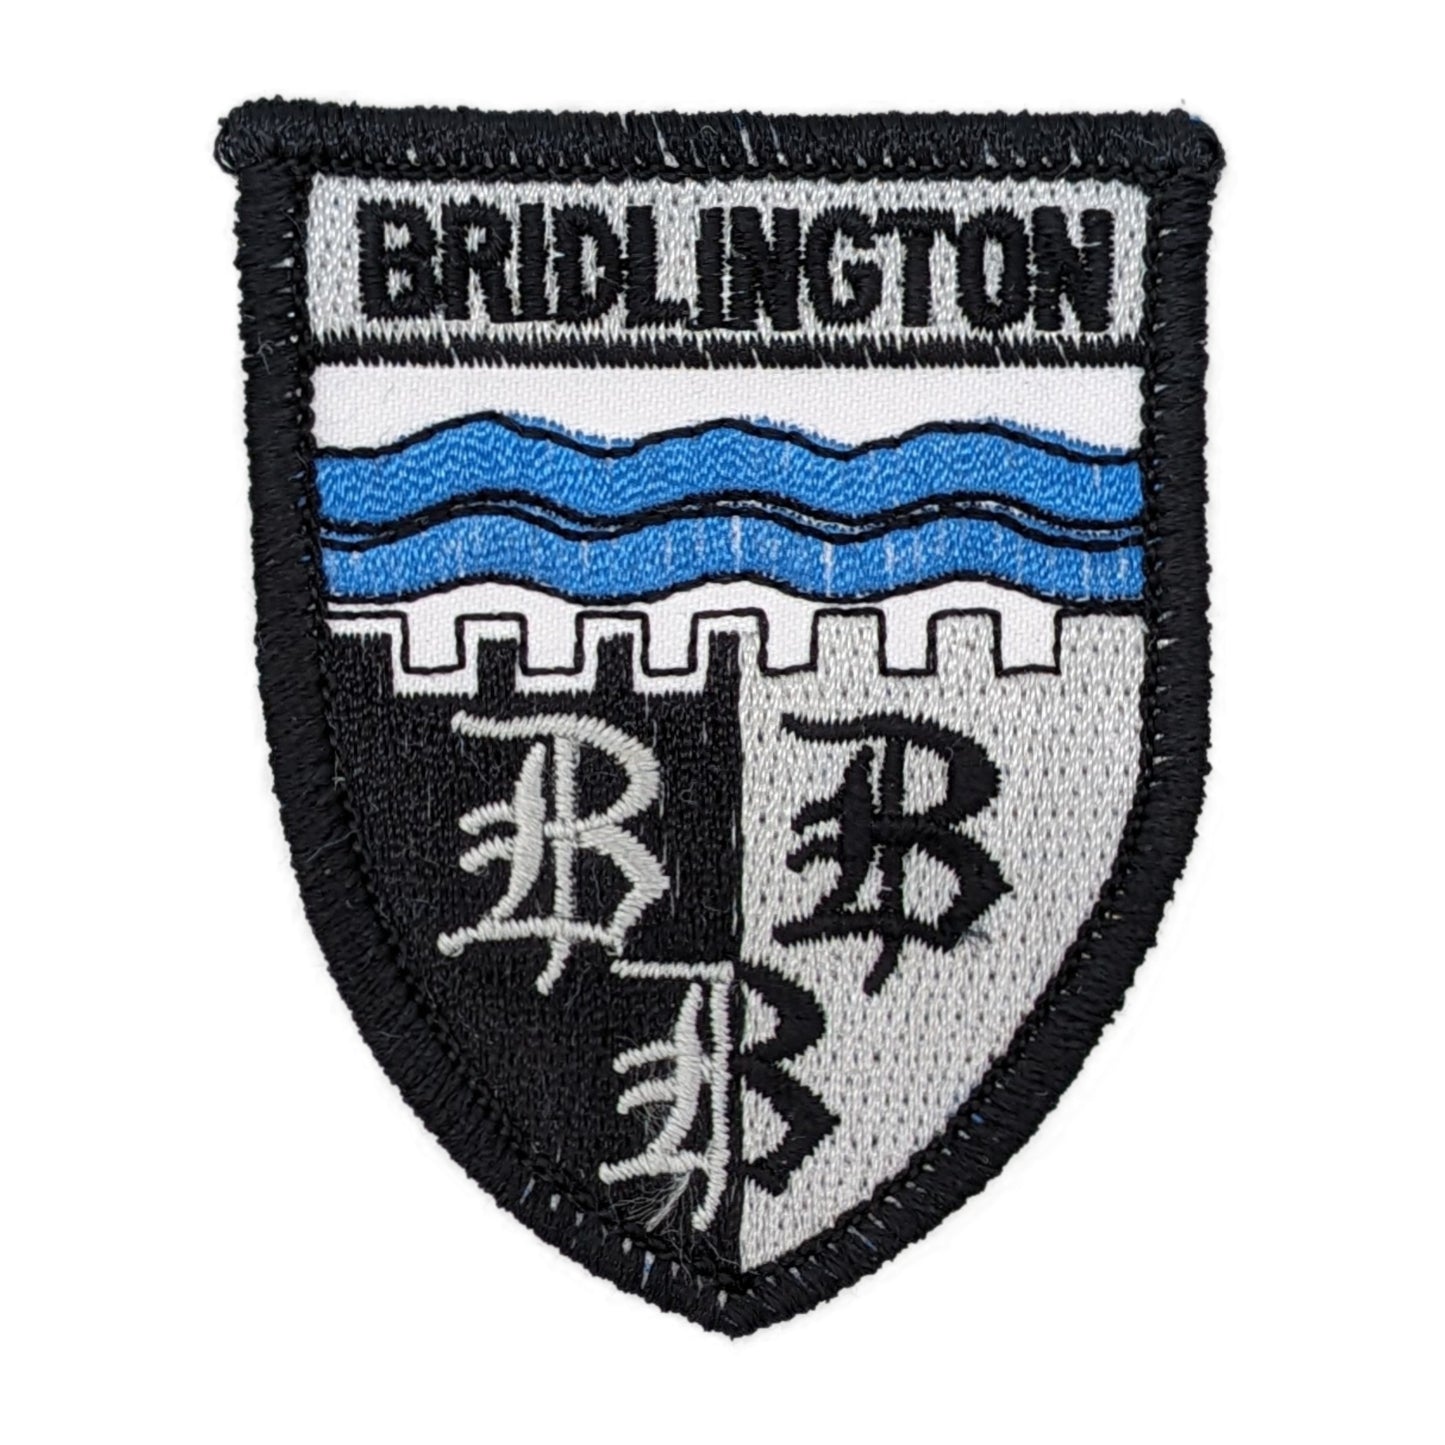 Bridlington Coat of Arms Embroidered Patch Badge - The Great Yorkshire Shop